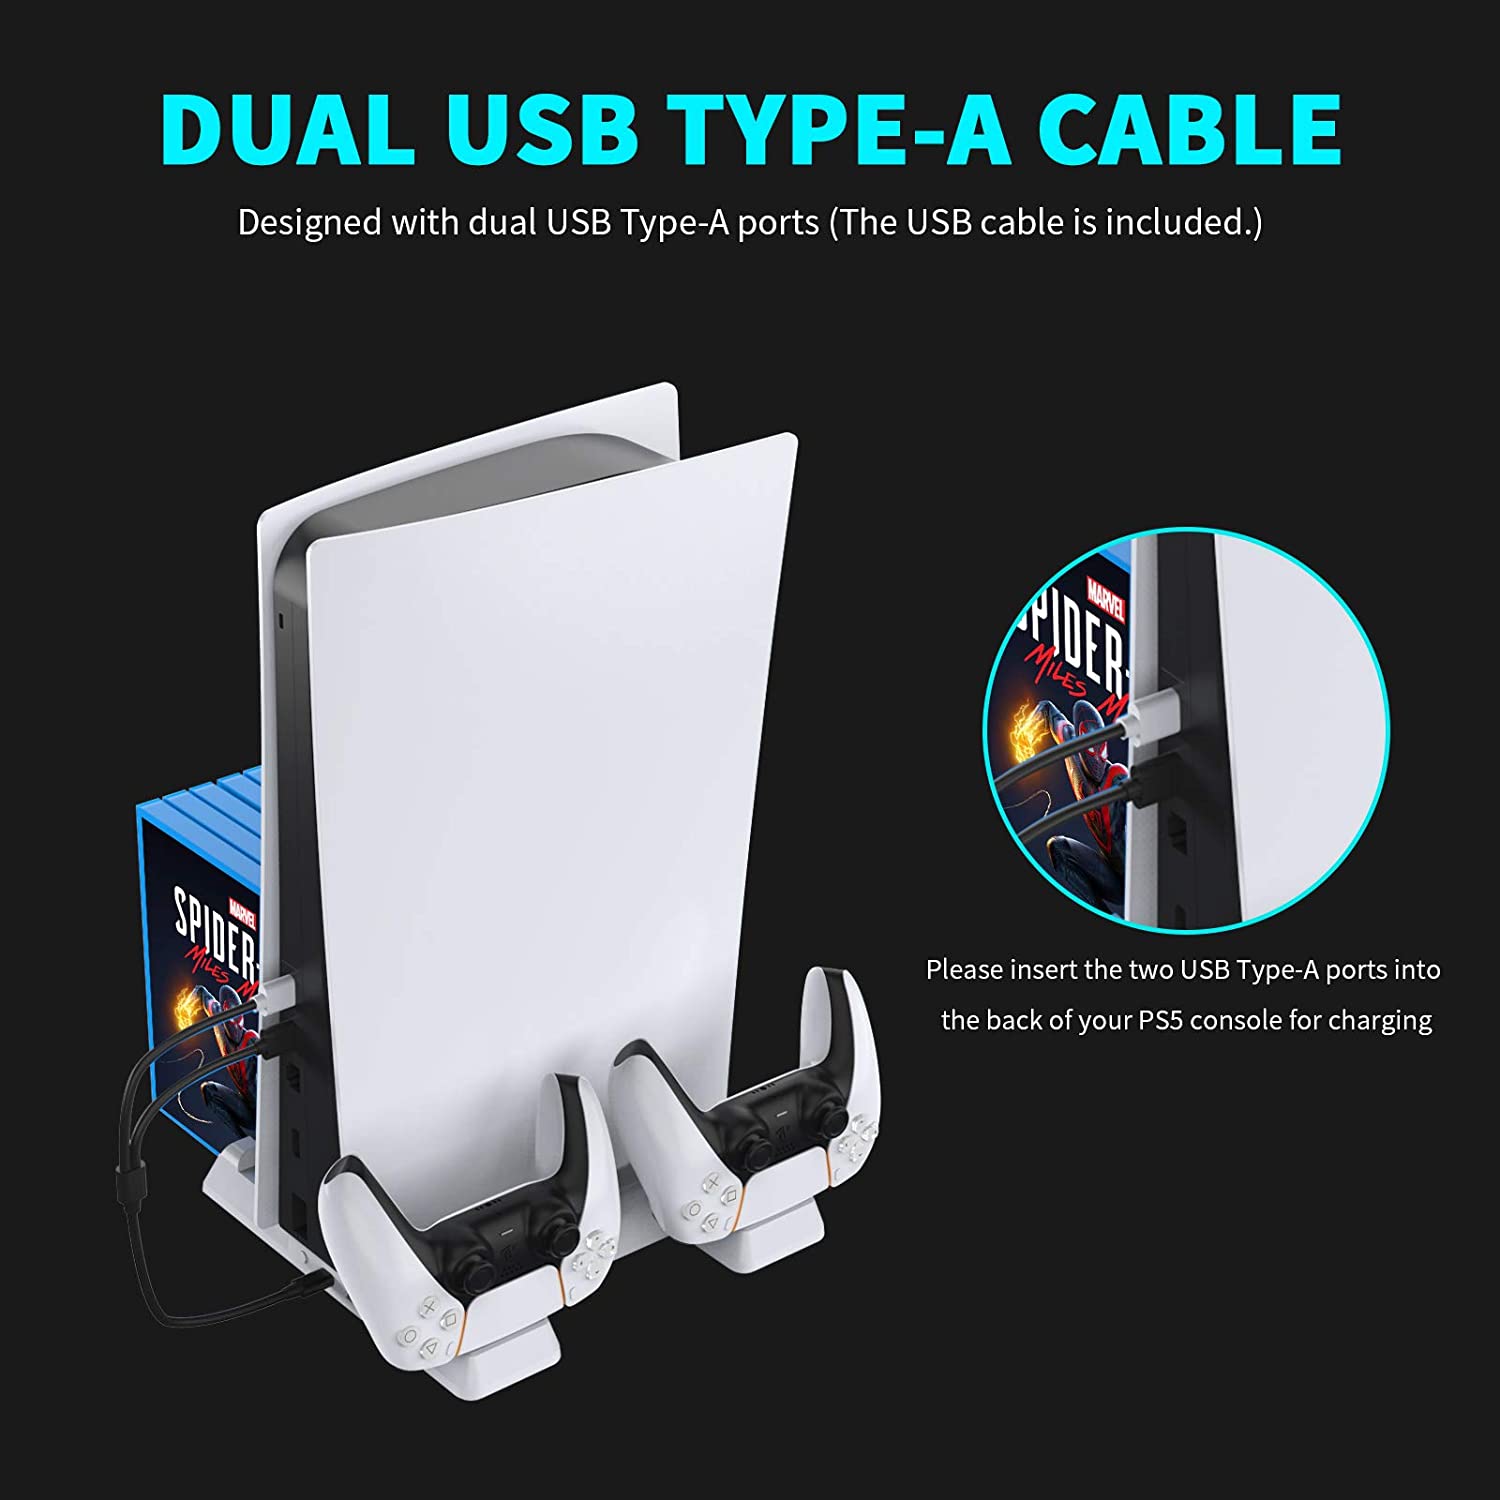 The cable with two USB-A ports can connect to the PS5 console to power the vertical stand and charge the controllers.